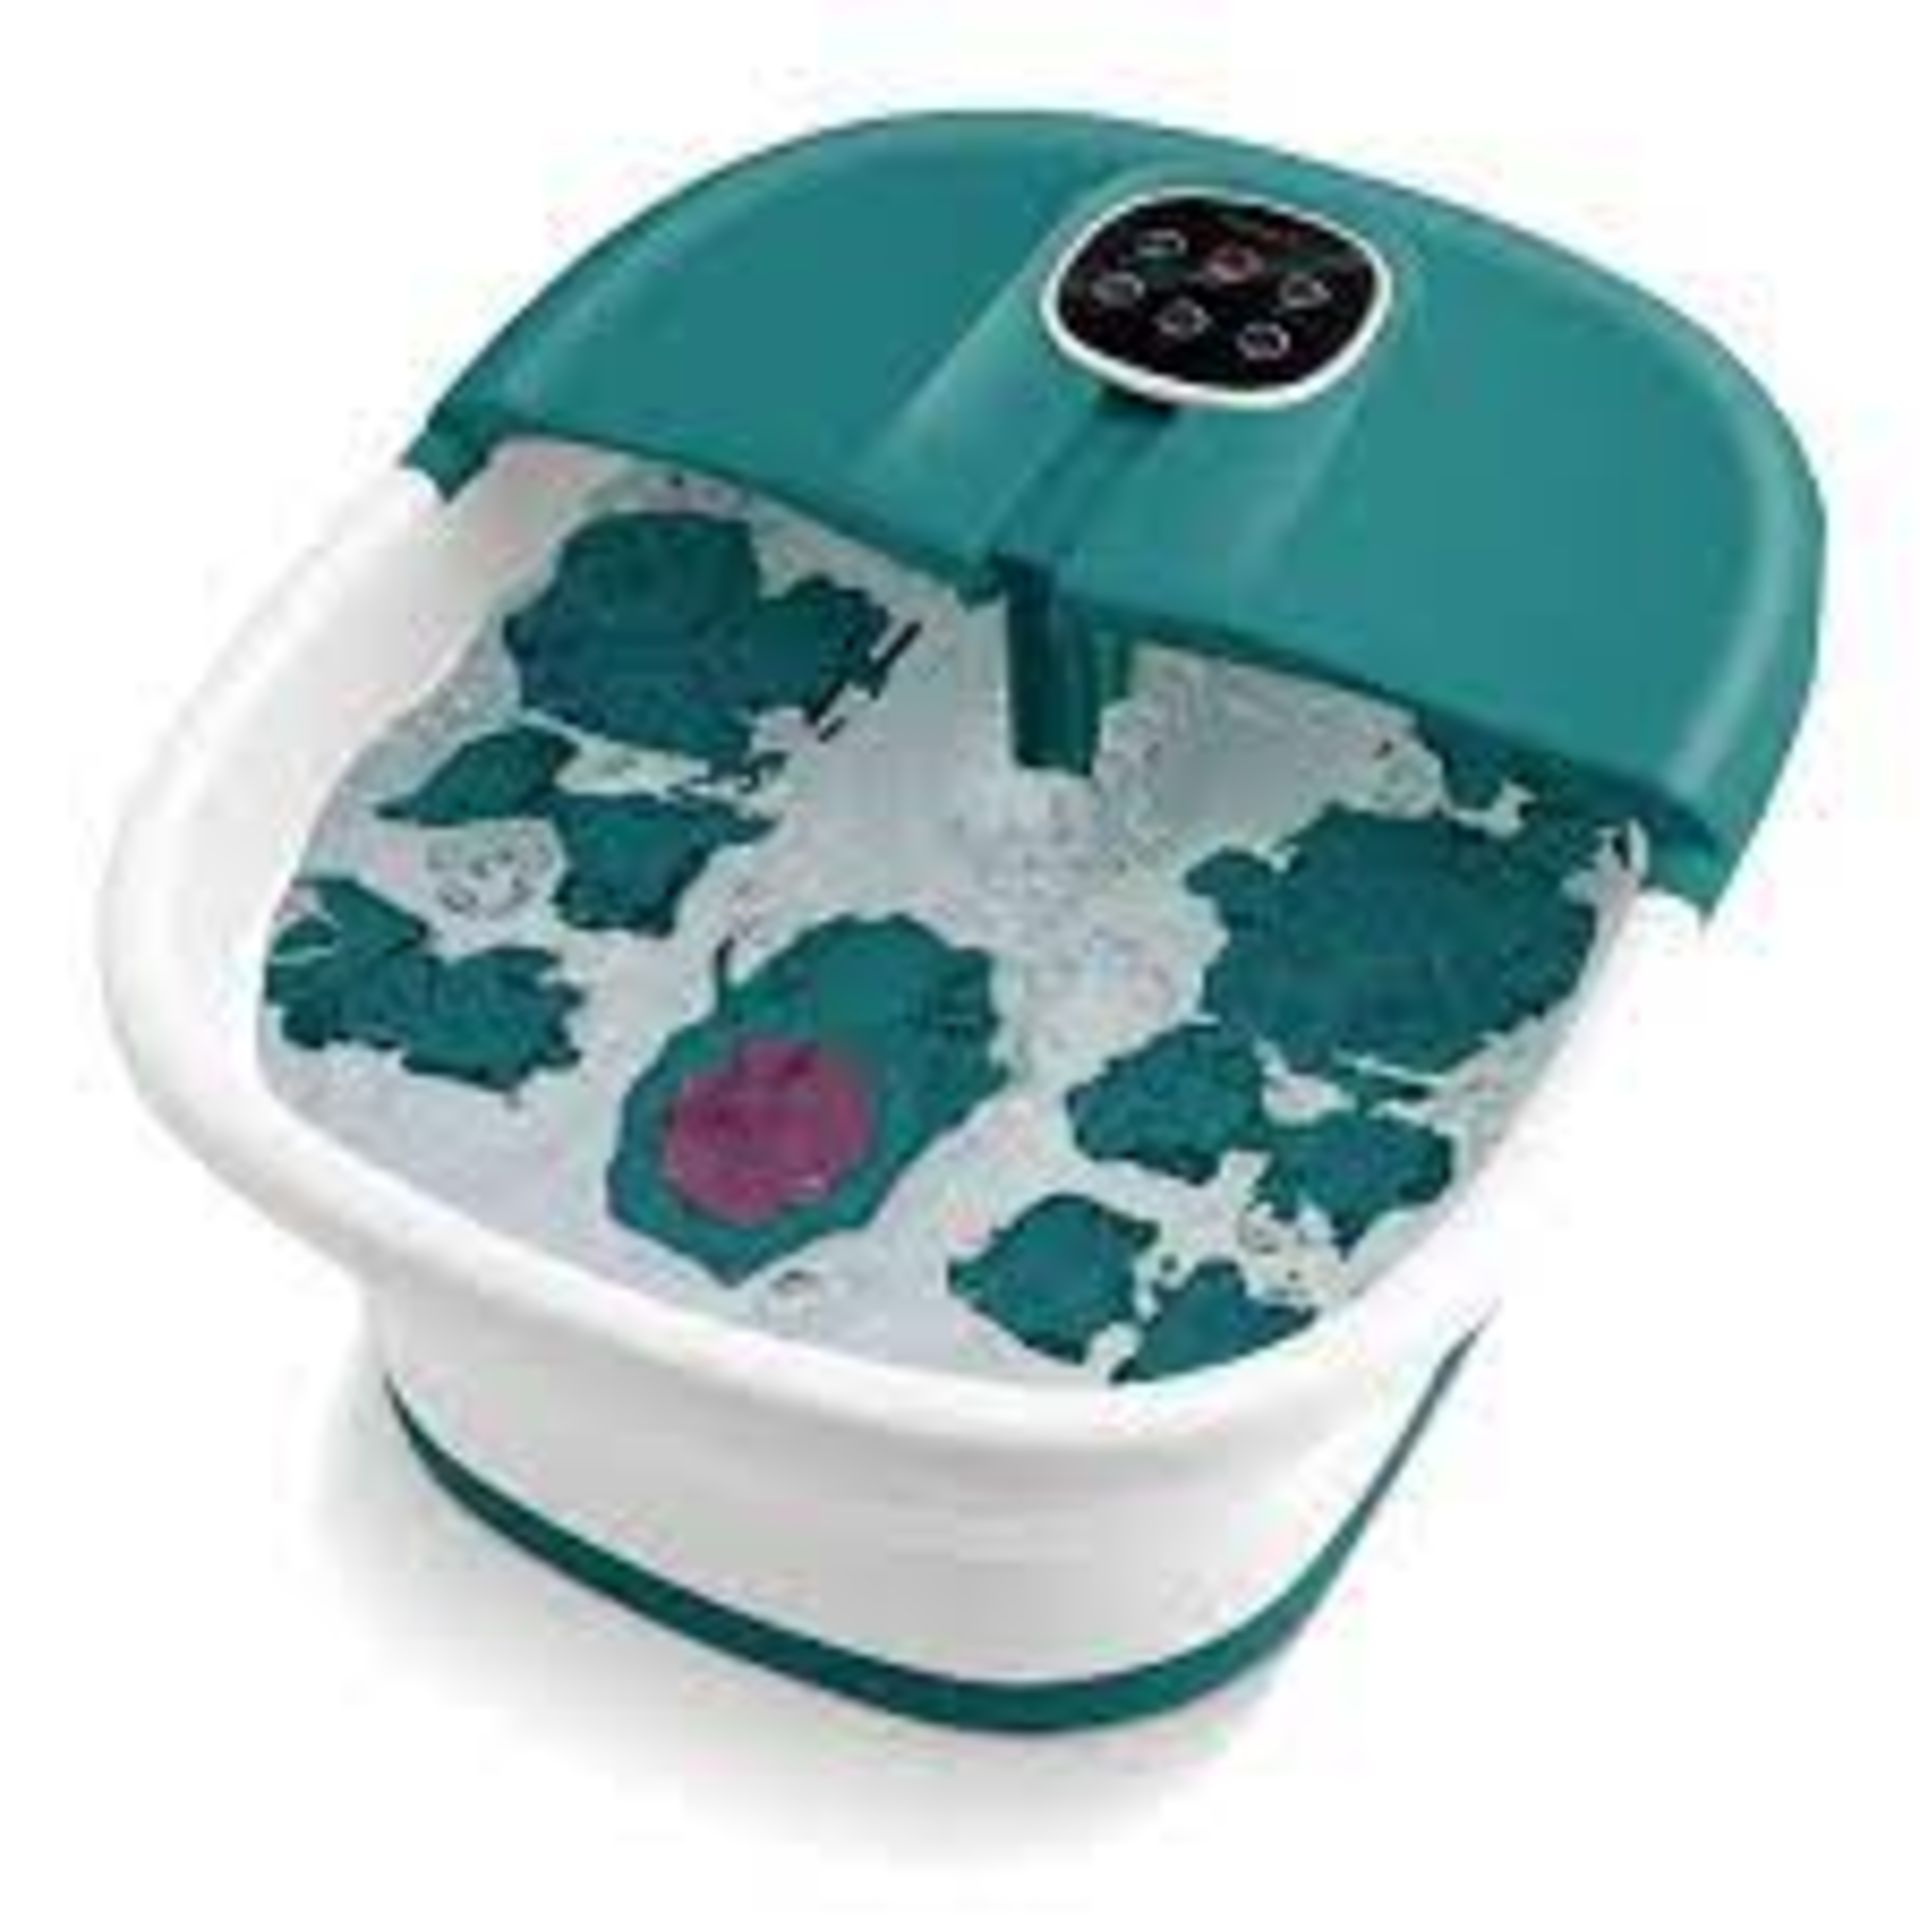 Foot Spa Bath Massager with Heat Bubbles and Remote Control-Teal Blue - ER53